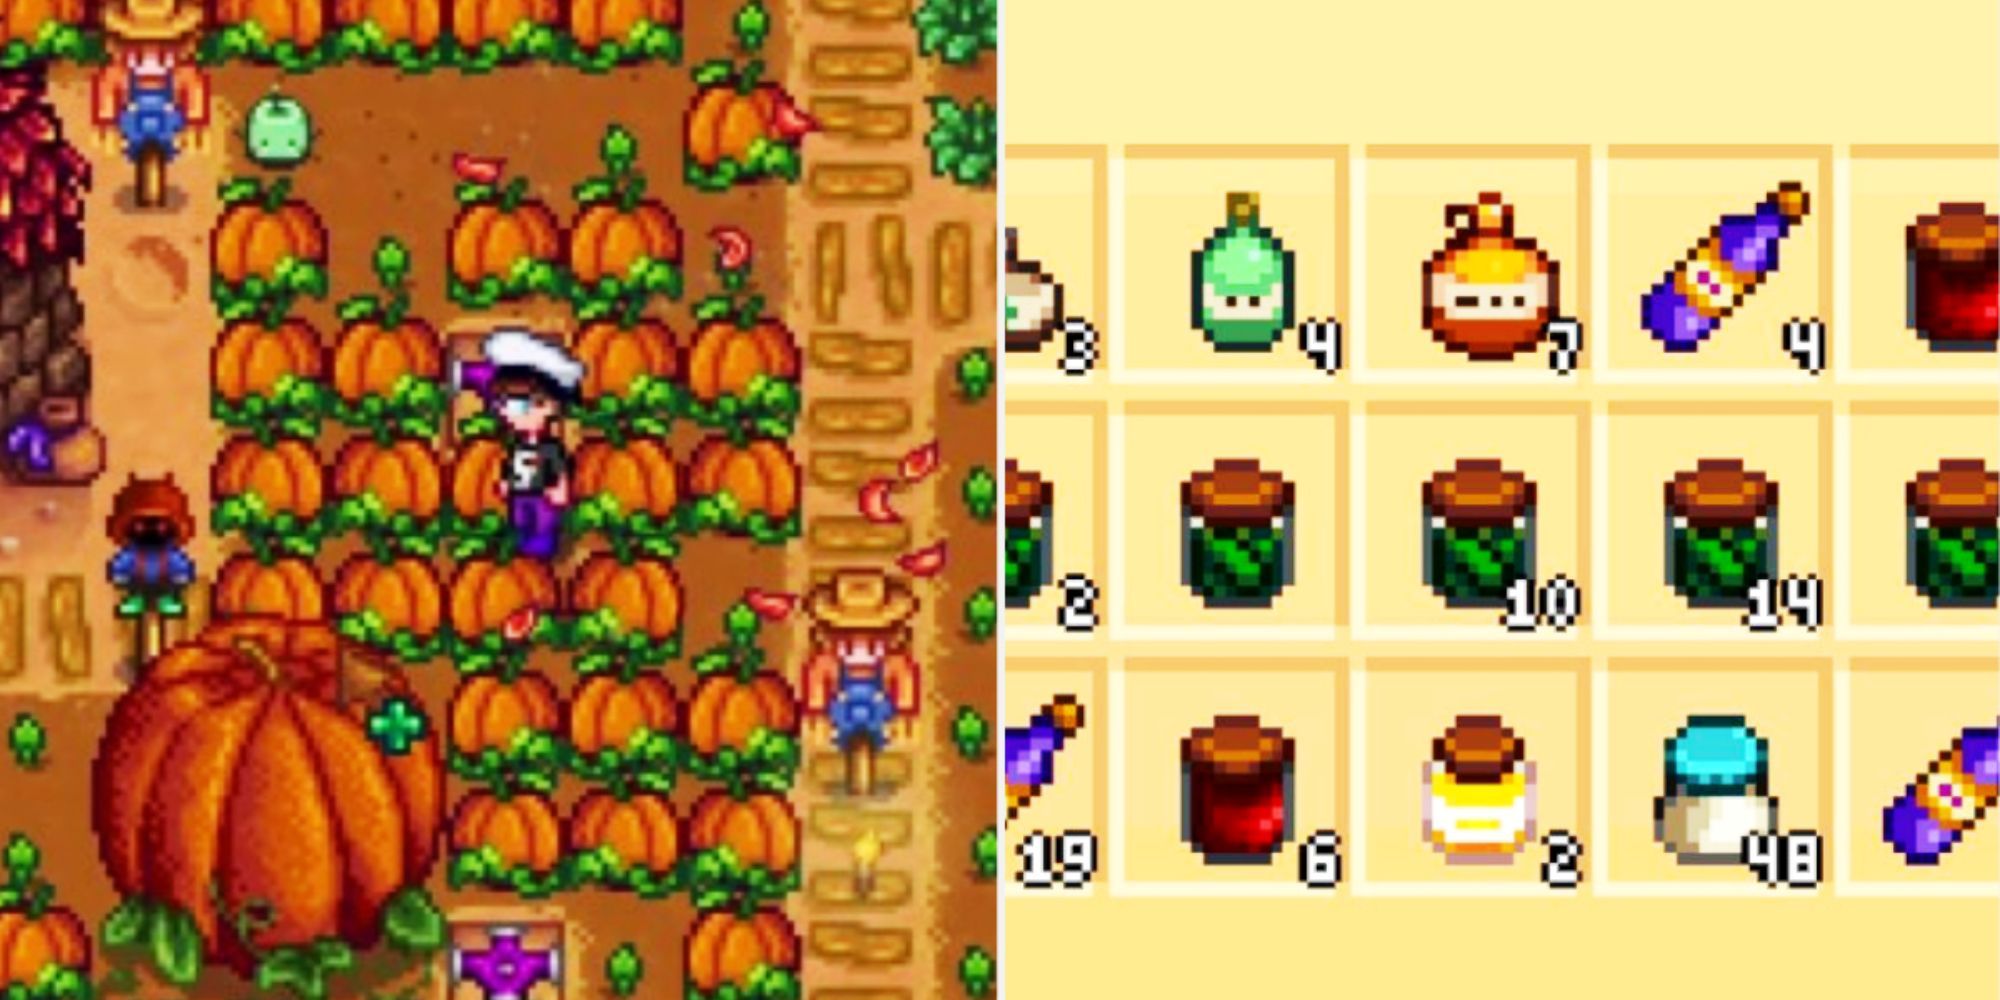 All Artisan Good Selling Prices In Stardew Valley